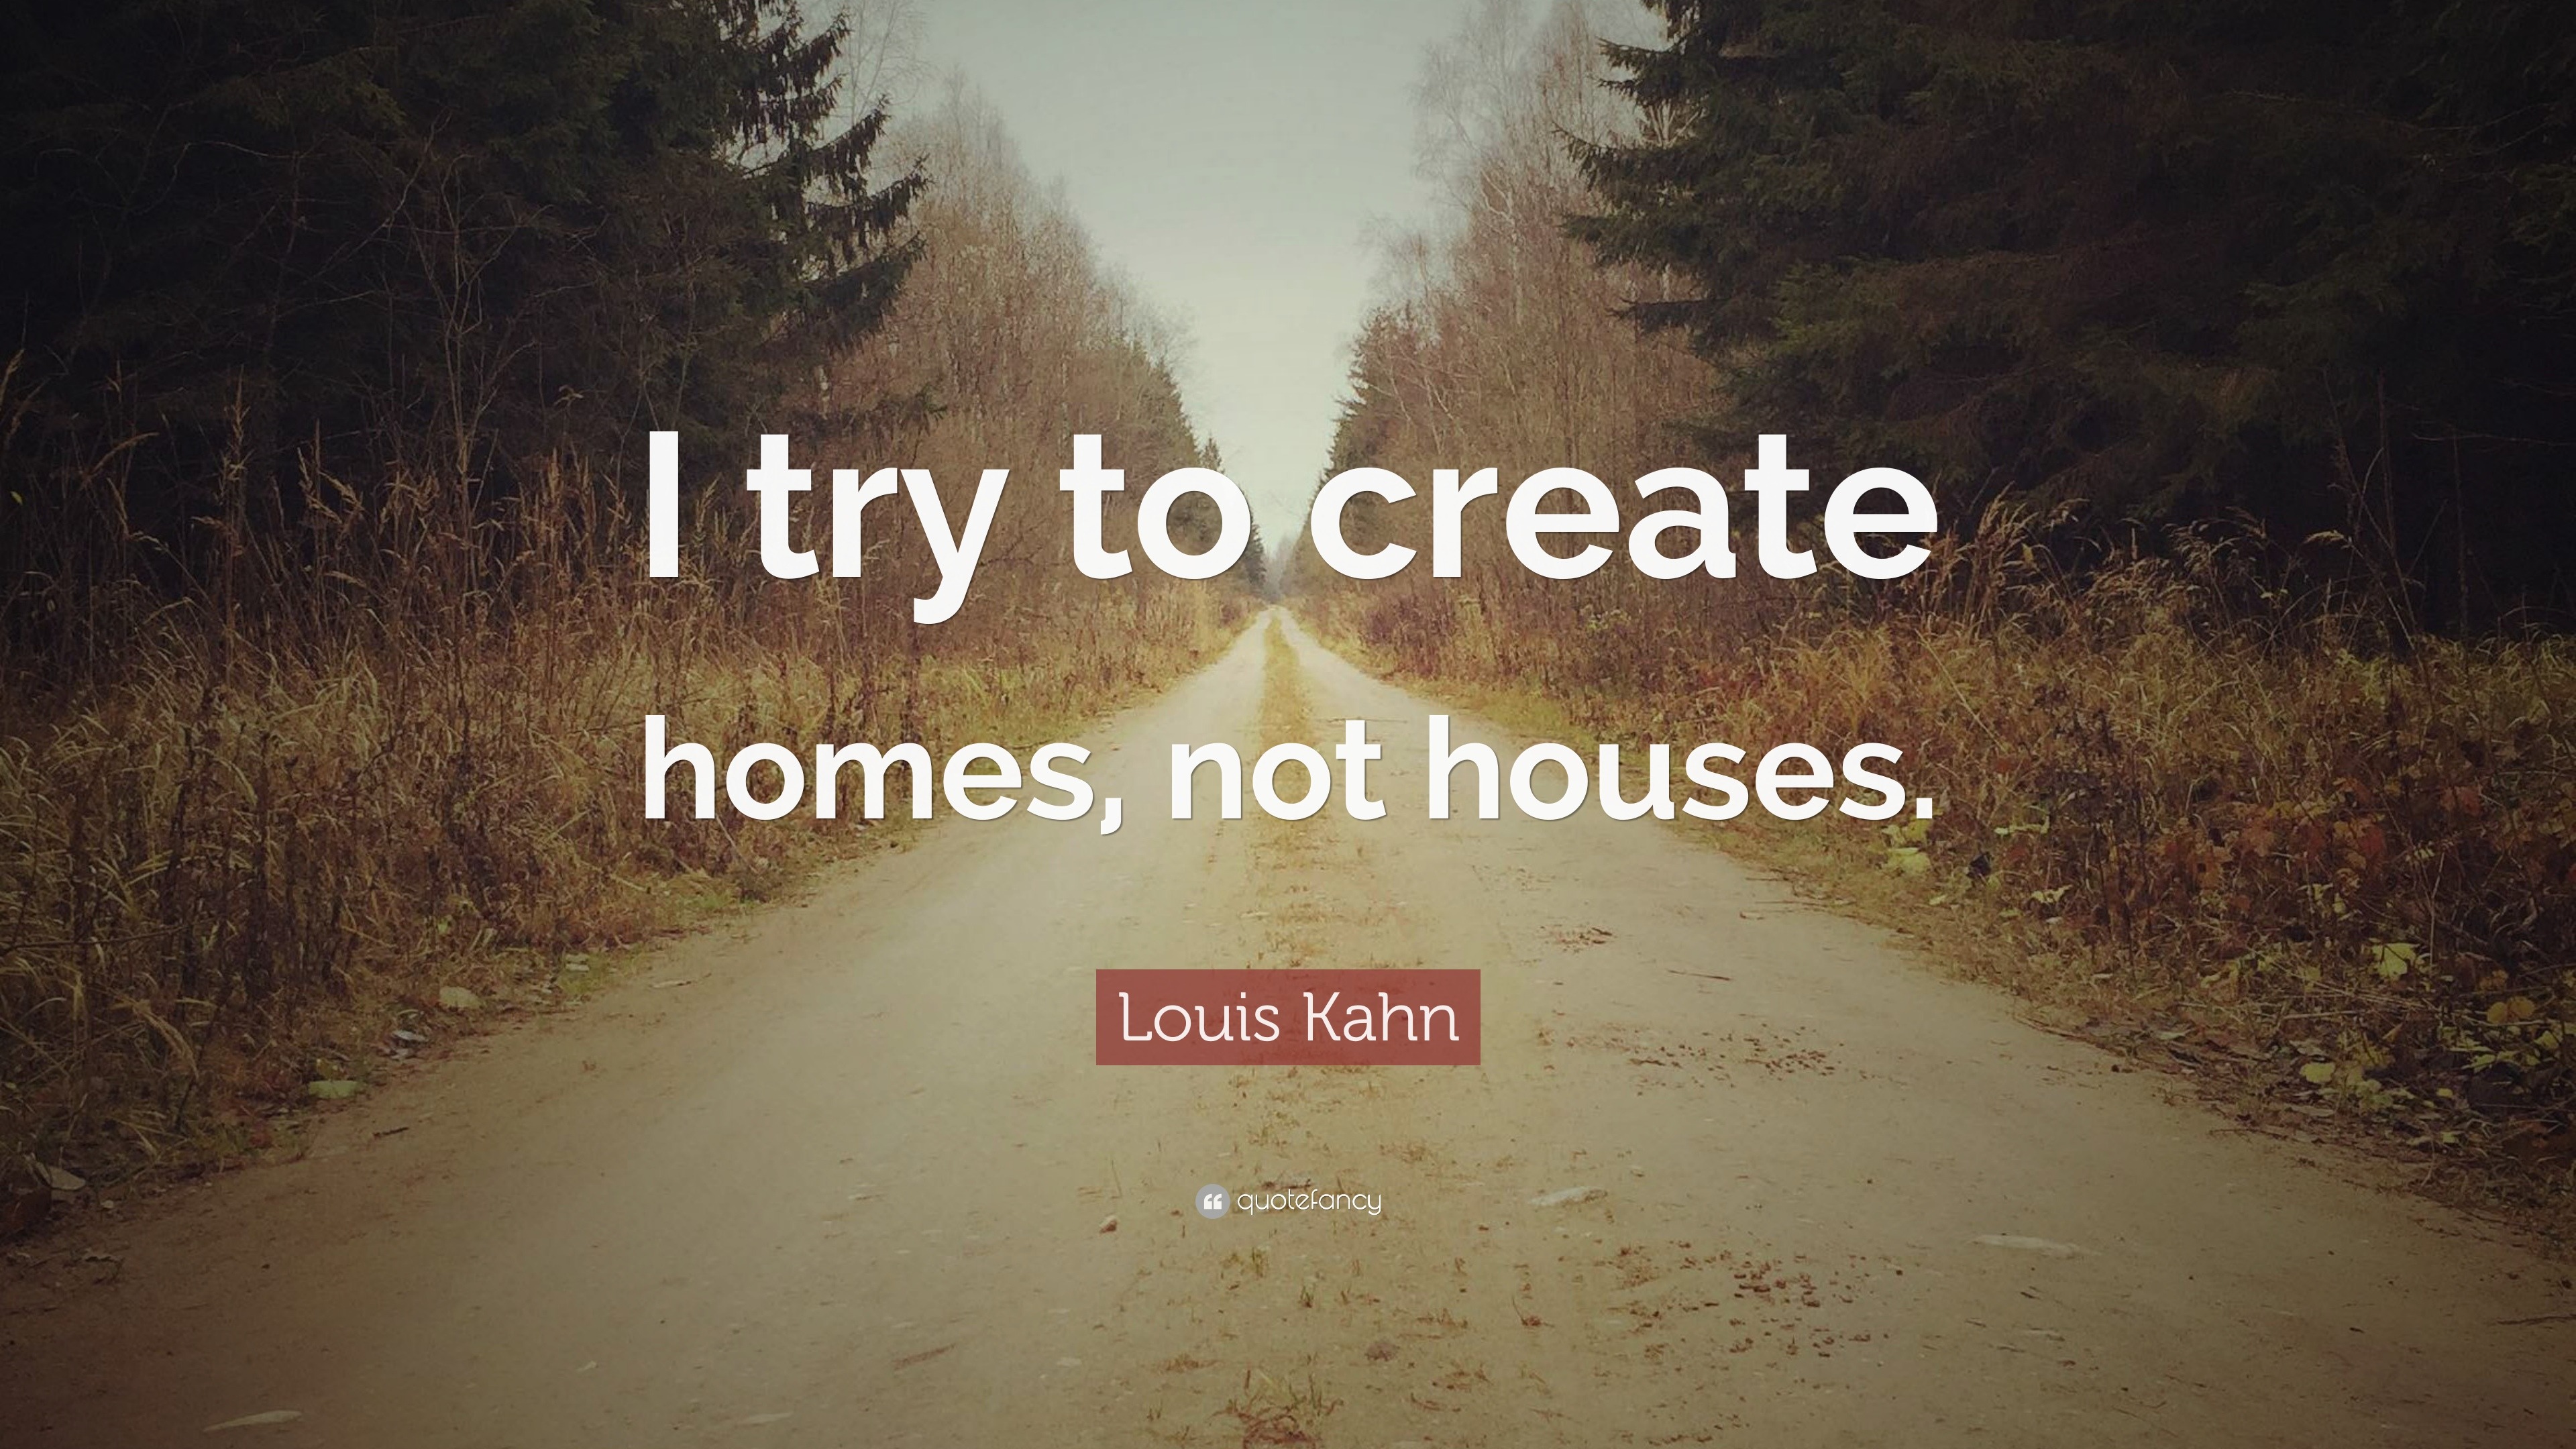 Louis Kahn Quote: “I try to create homes, not houses.”
